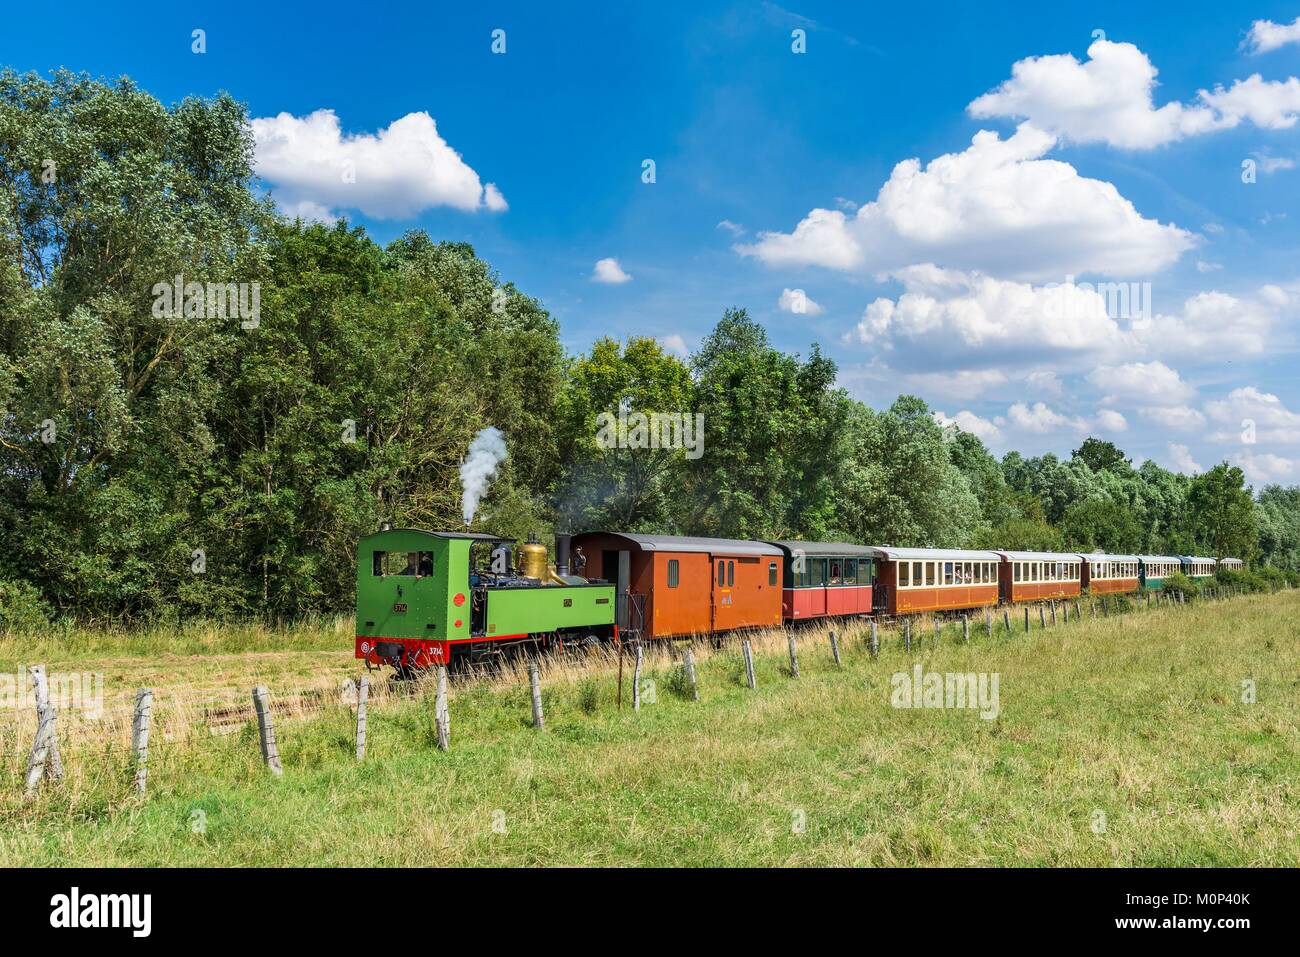 France,Somme,the Baie de Somme Railway on the Bains de Mer network connects the tourist resorts of Cayeux-sur-Mer,Saint-Valery-sur-Somme,Noyelles-sur-Mer and Le Crotoy Stock Photo